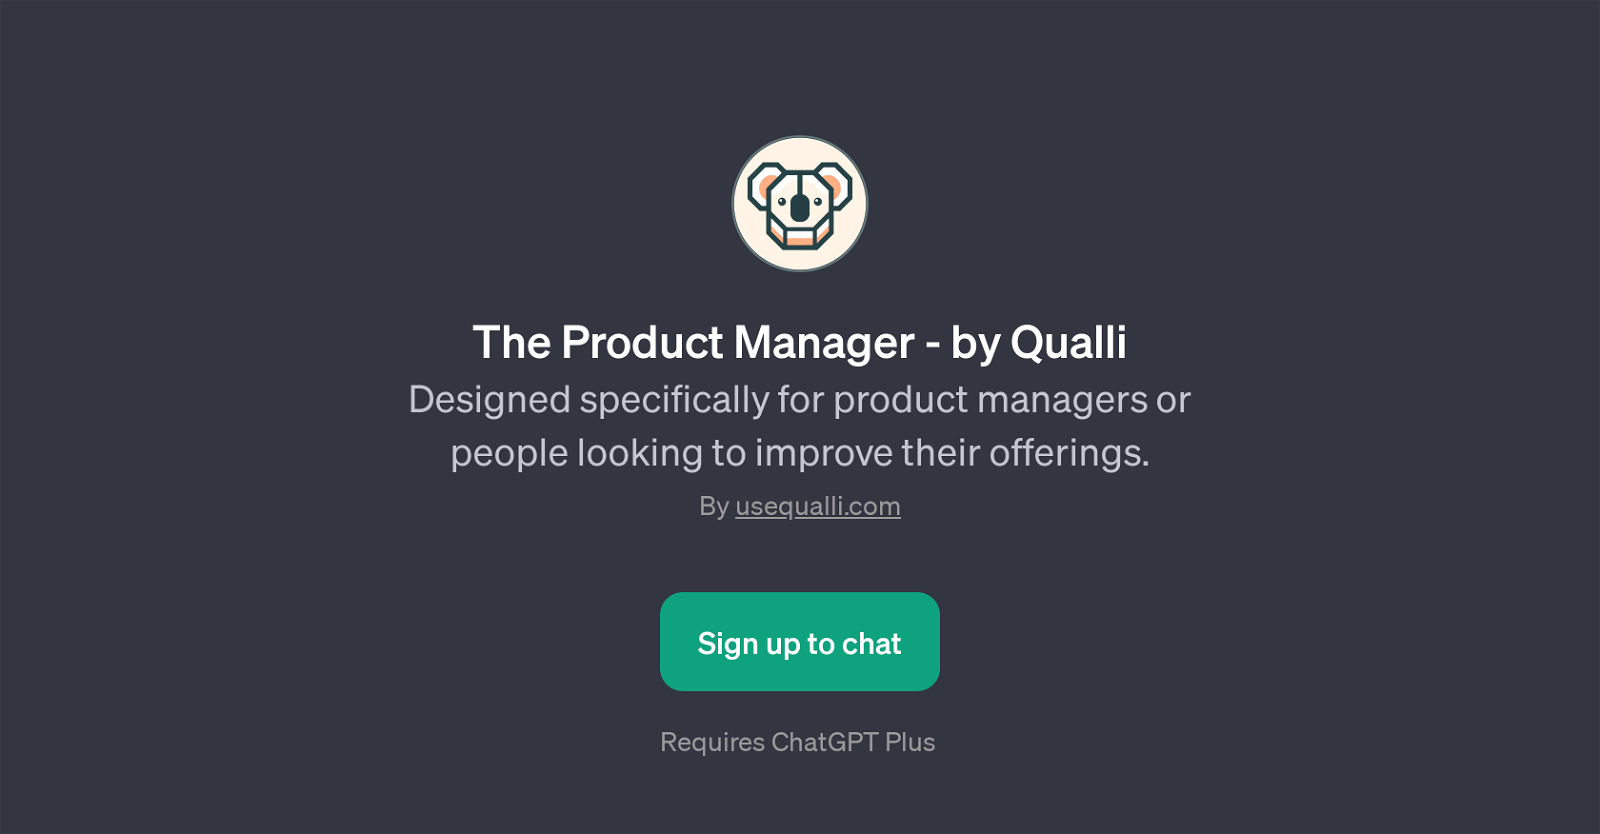 The Product Manager - by Qualli website